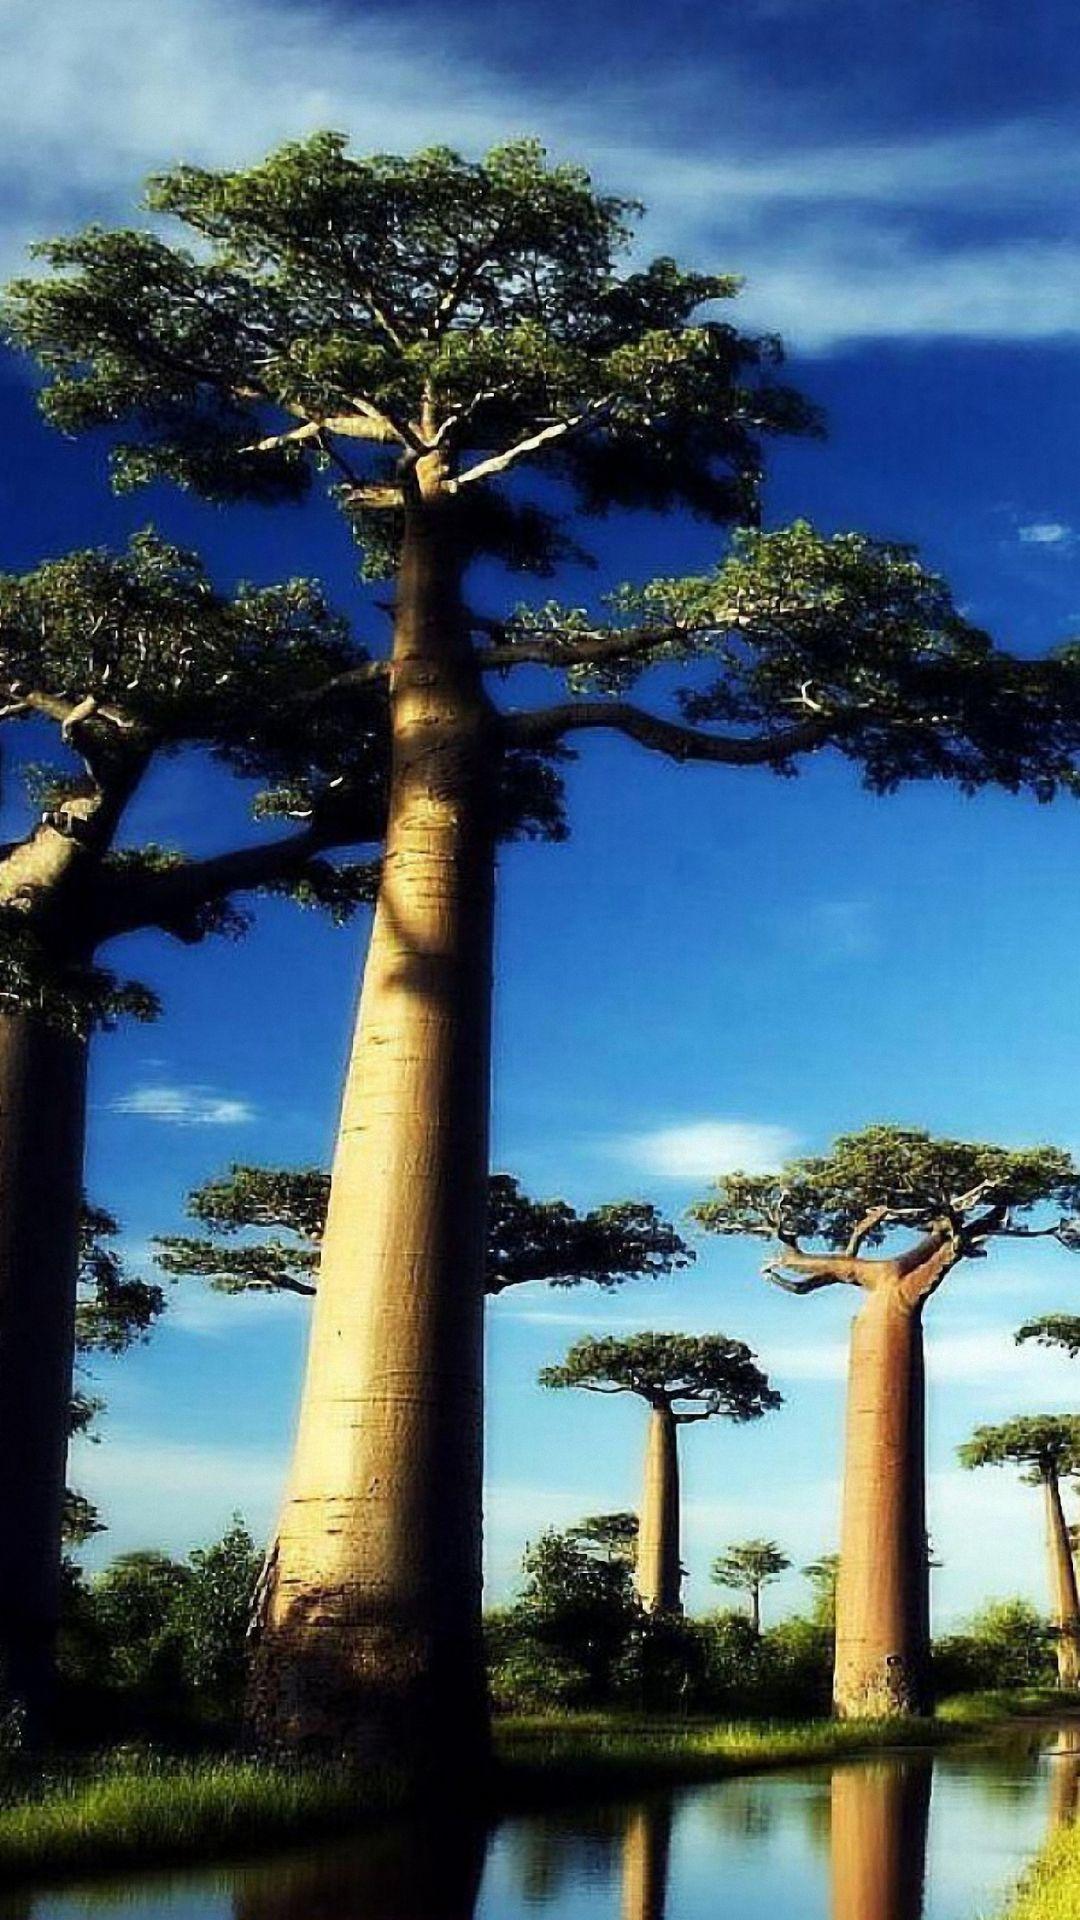 HD cool big tree iPhone 6 / 6s / 6s Plus wallpaper, nature mobile background download. Tree wallpaper iphone, Baobab tree, Tree HD wallpaper